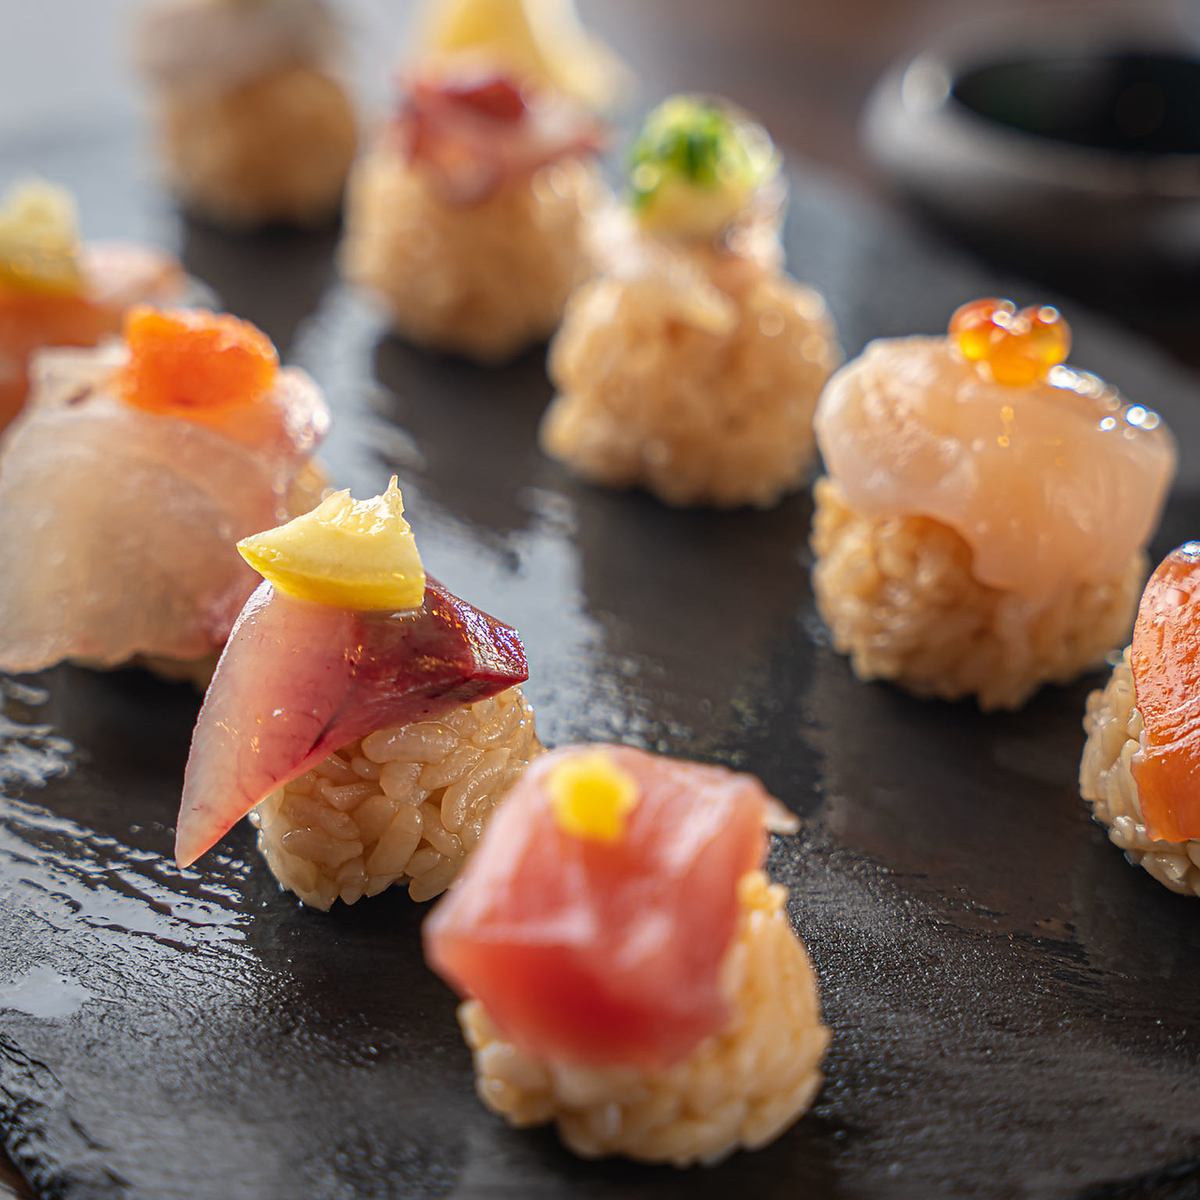 A cheap and delicious sushi izakaya where you can enjoy carefully selected delicacies at reasonable prices.